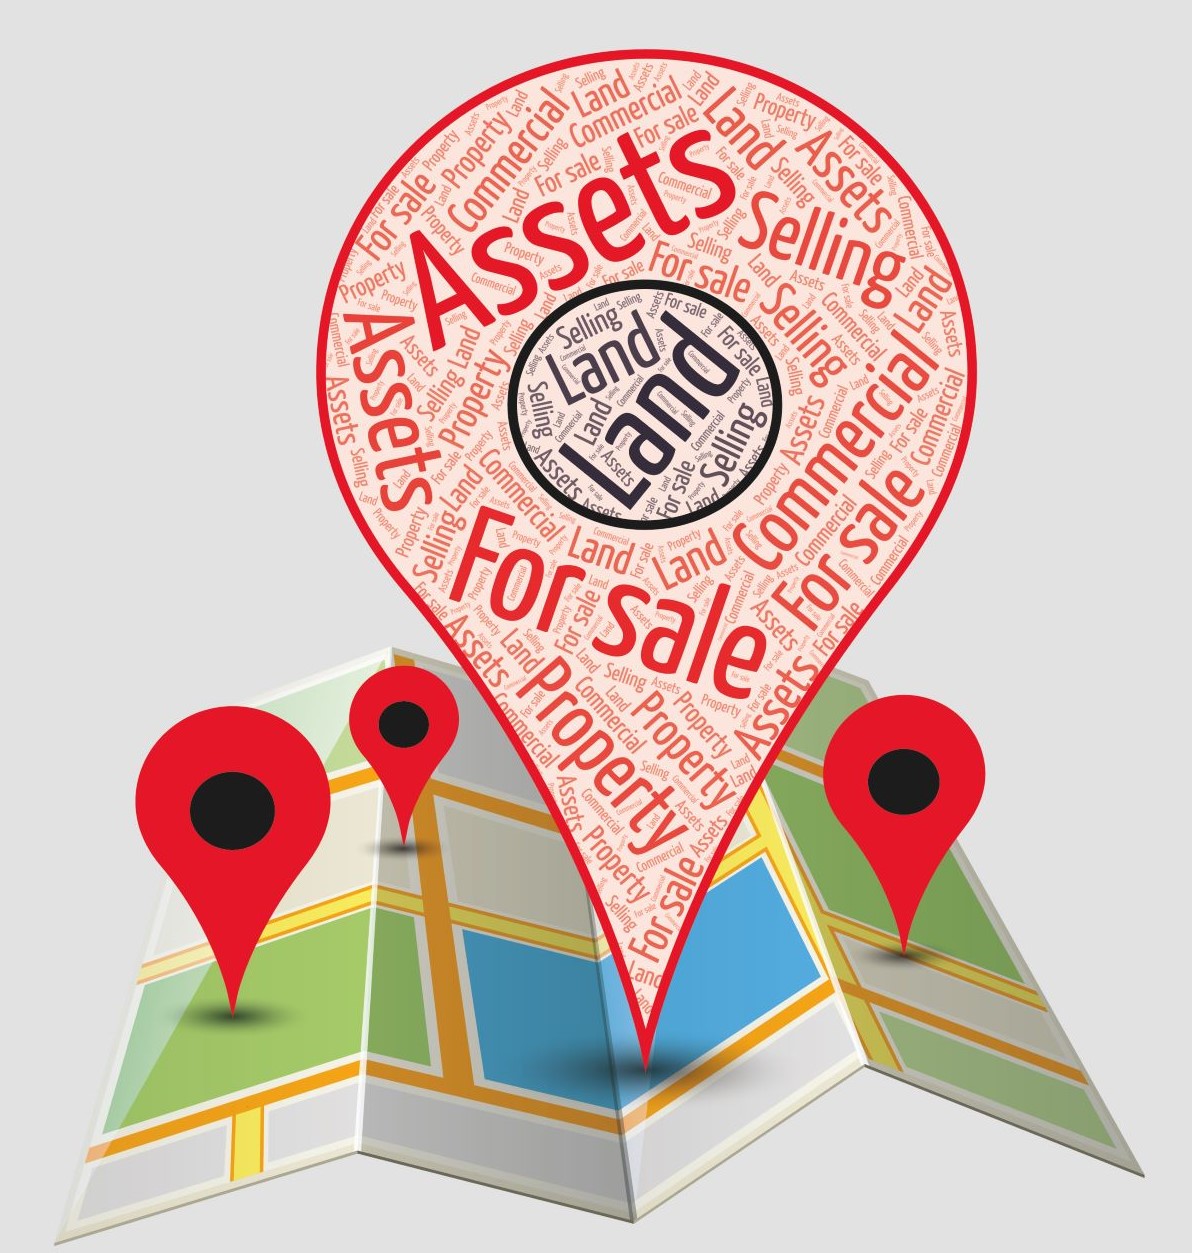 Image from asset disposals campaign